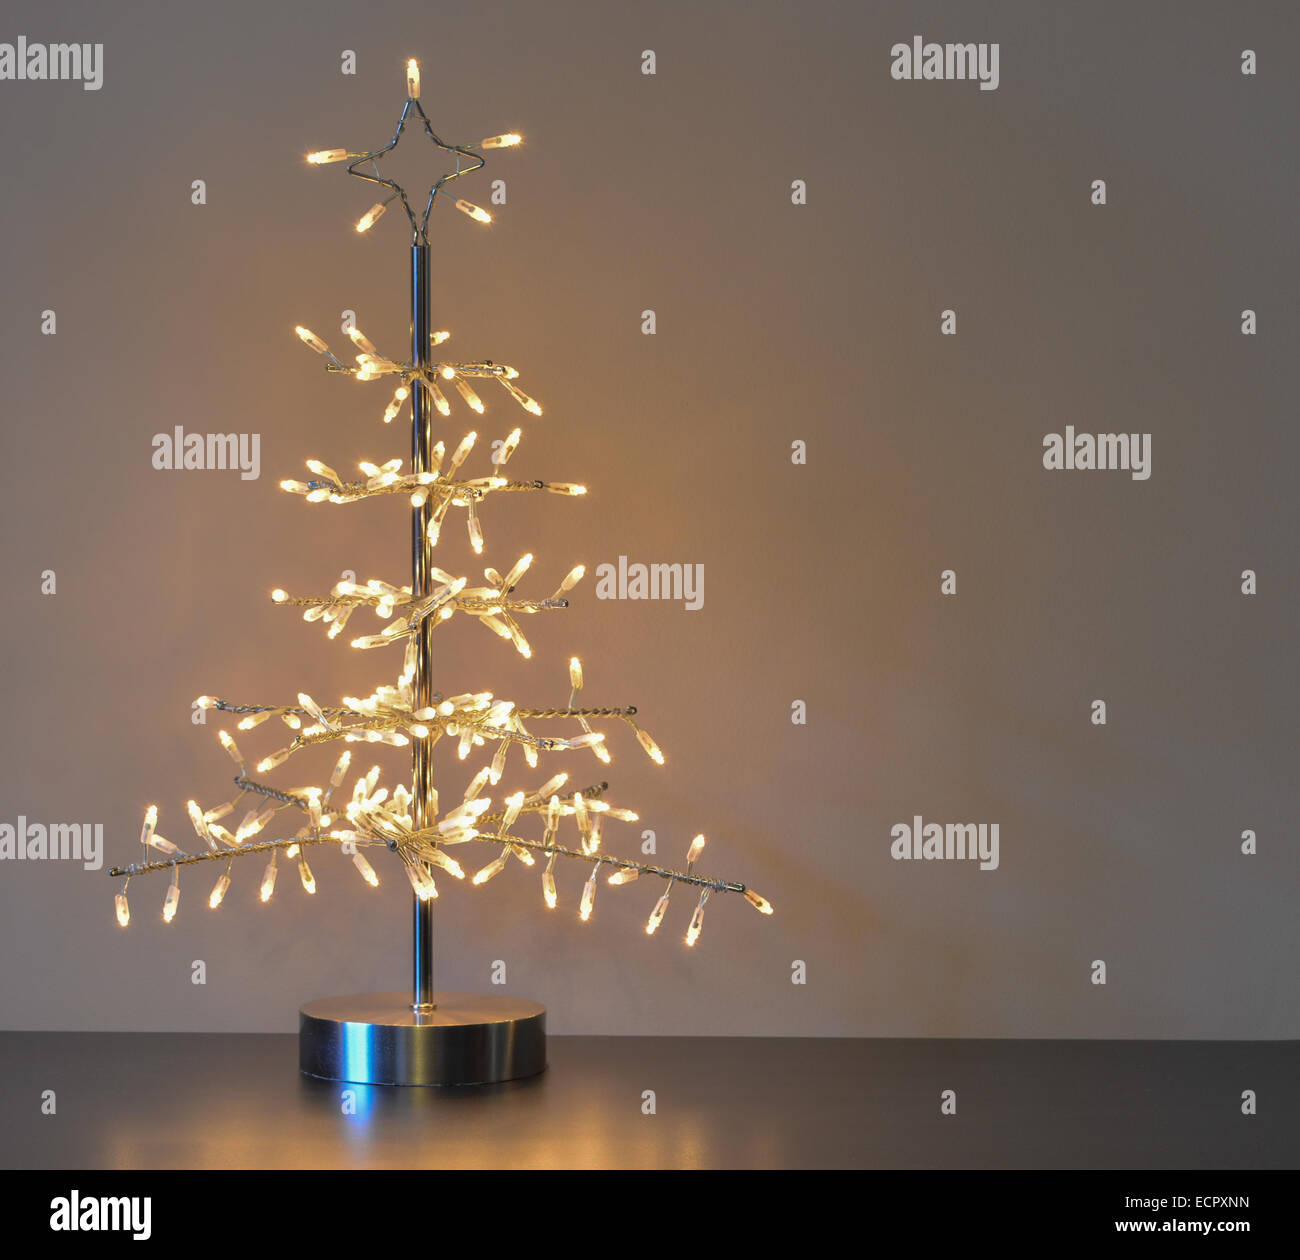 silver metal christmas tree decoration standing on table with warm white lights Stock Photo